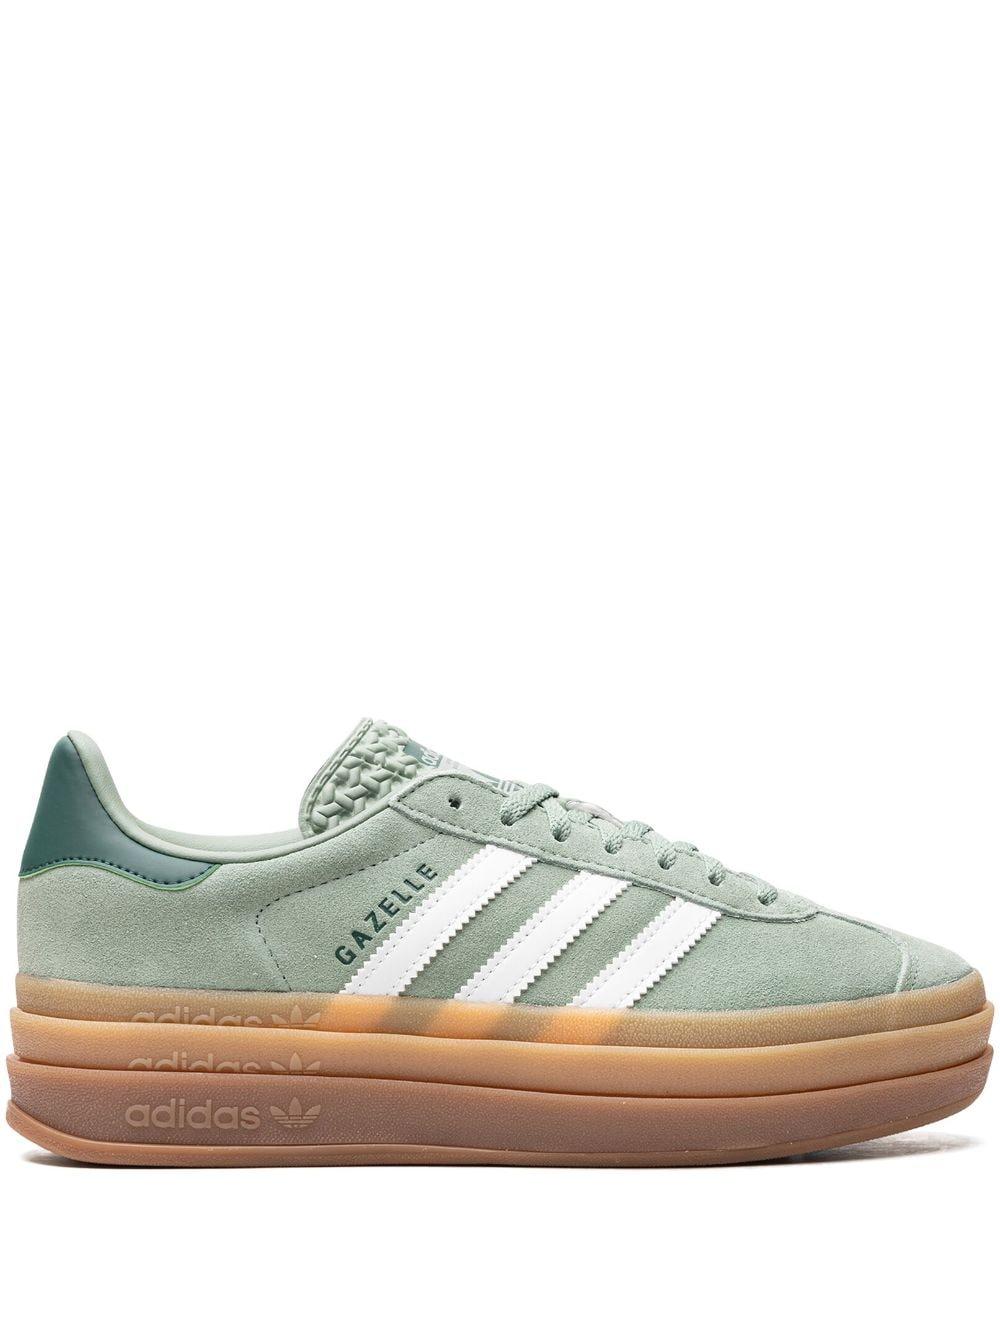 adidas Gazelle Brand-patch Suede Low-top Trainers in Green | Lyst